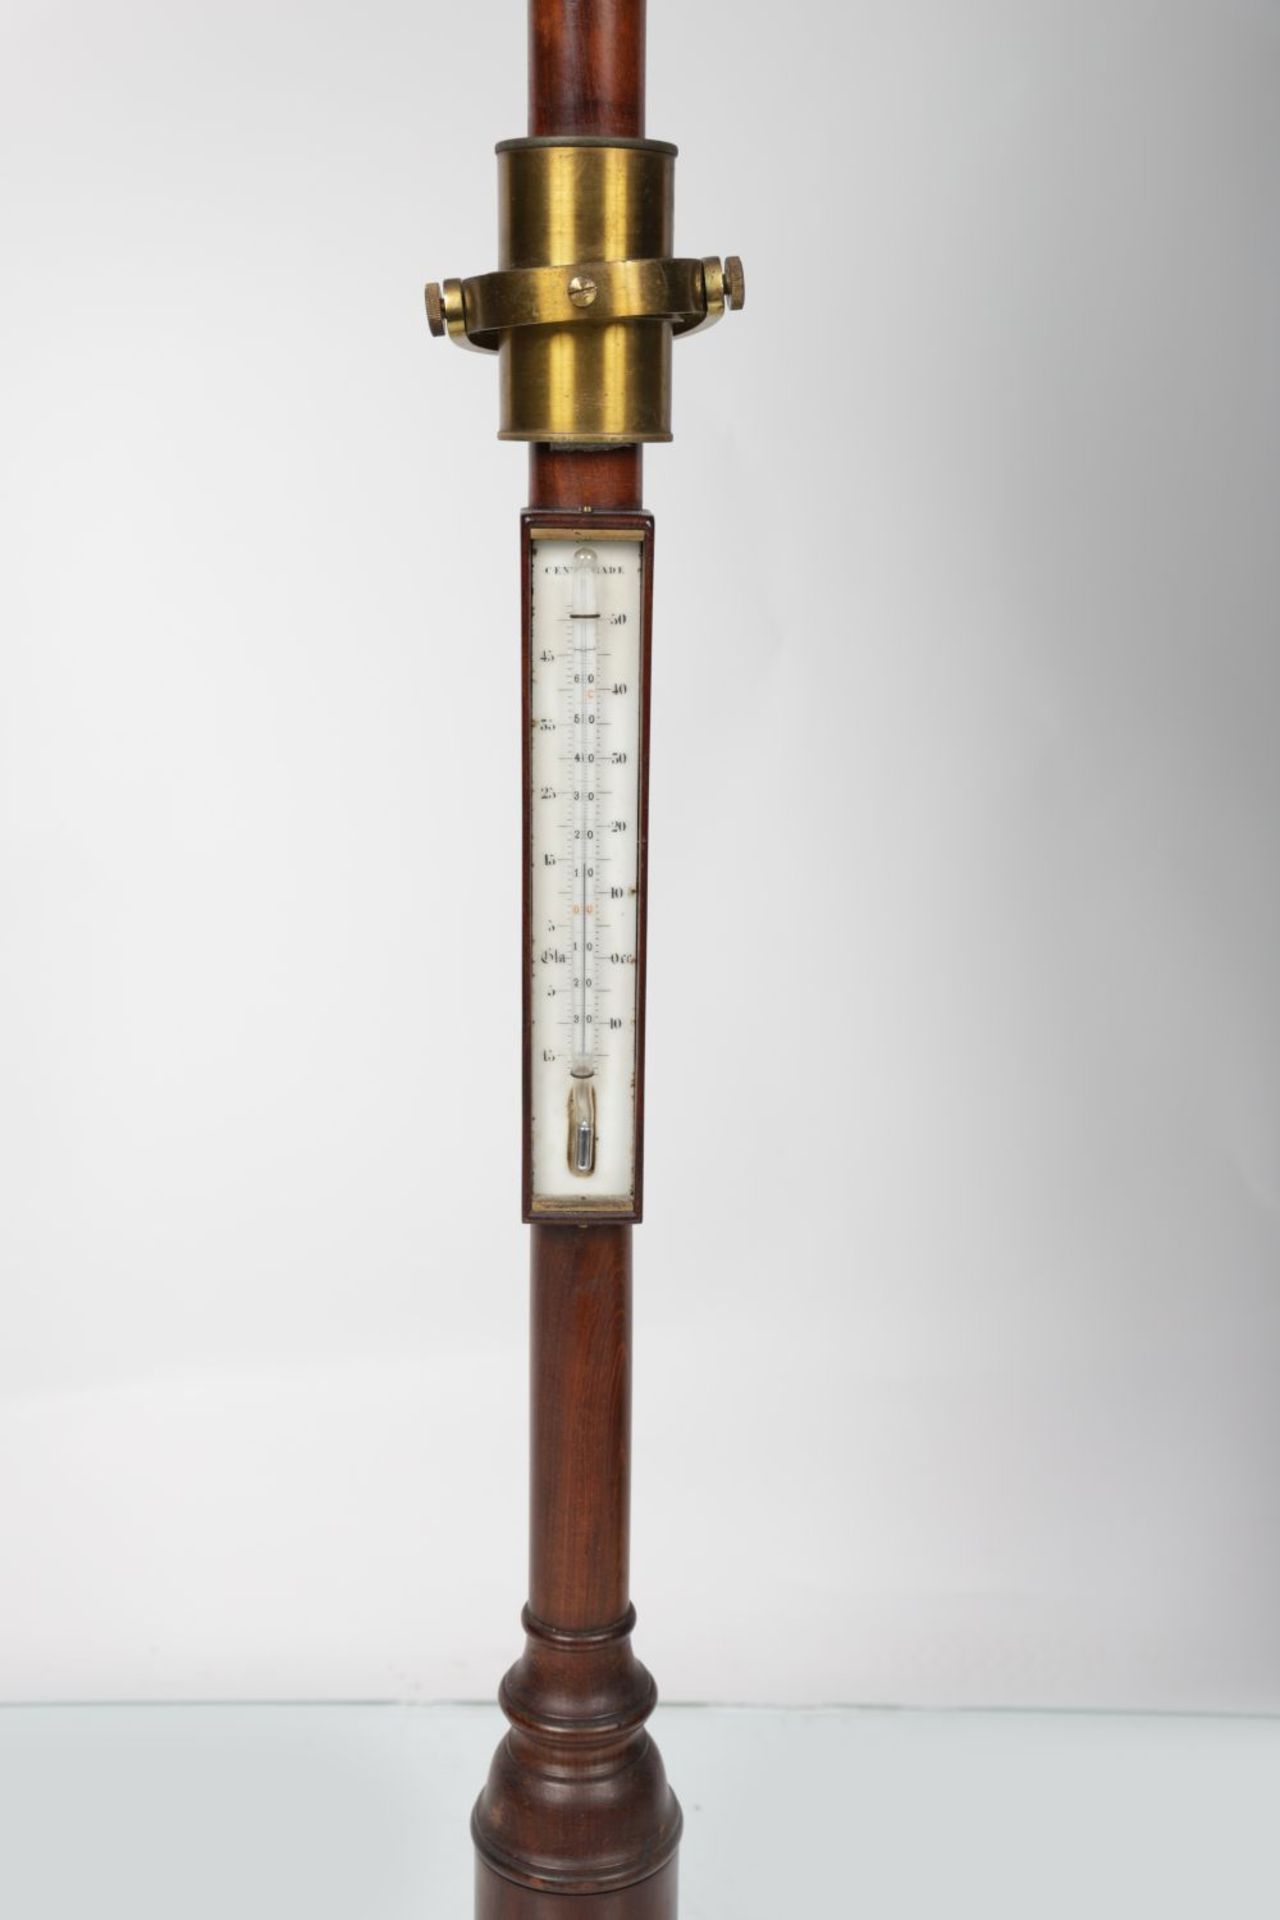 LATE 18TH-CENTURY FRENCH SHIP'S STICK BAROMETER - Image 3 of 4